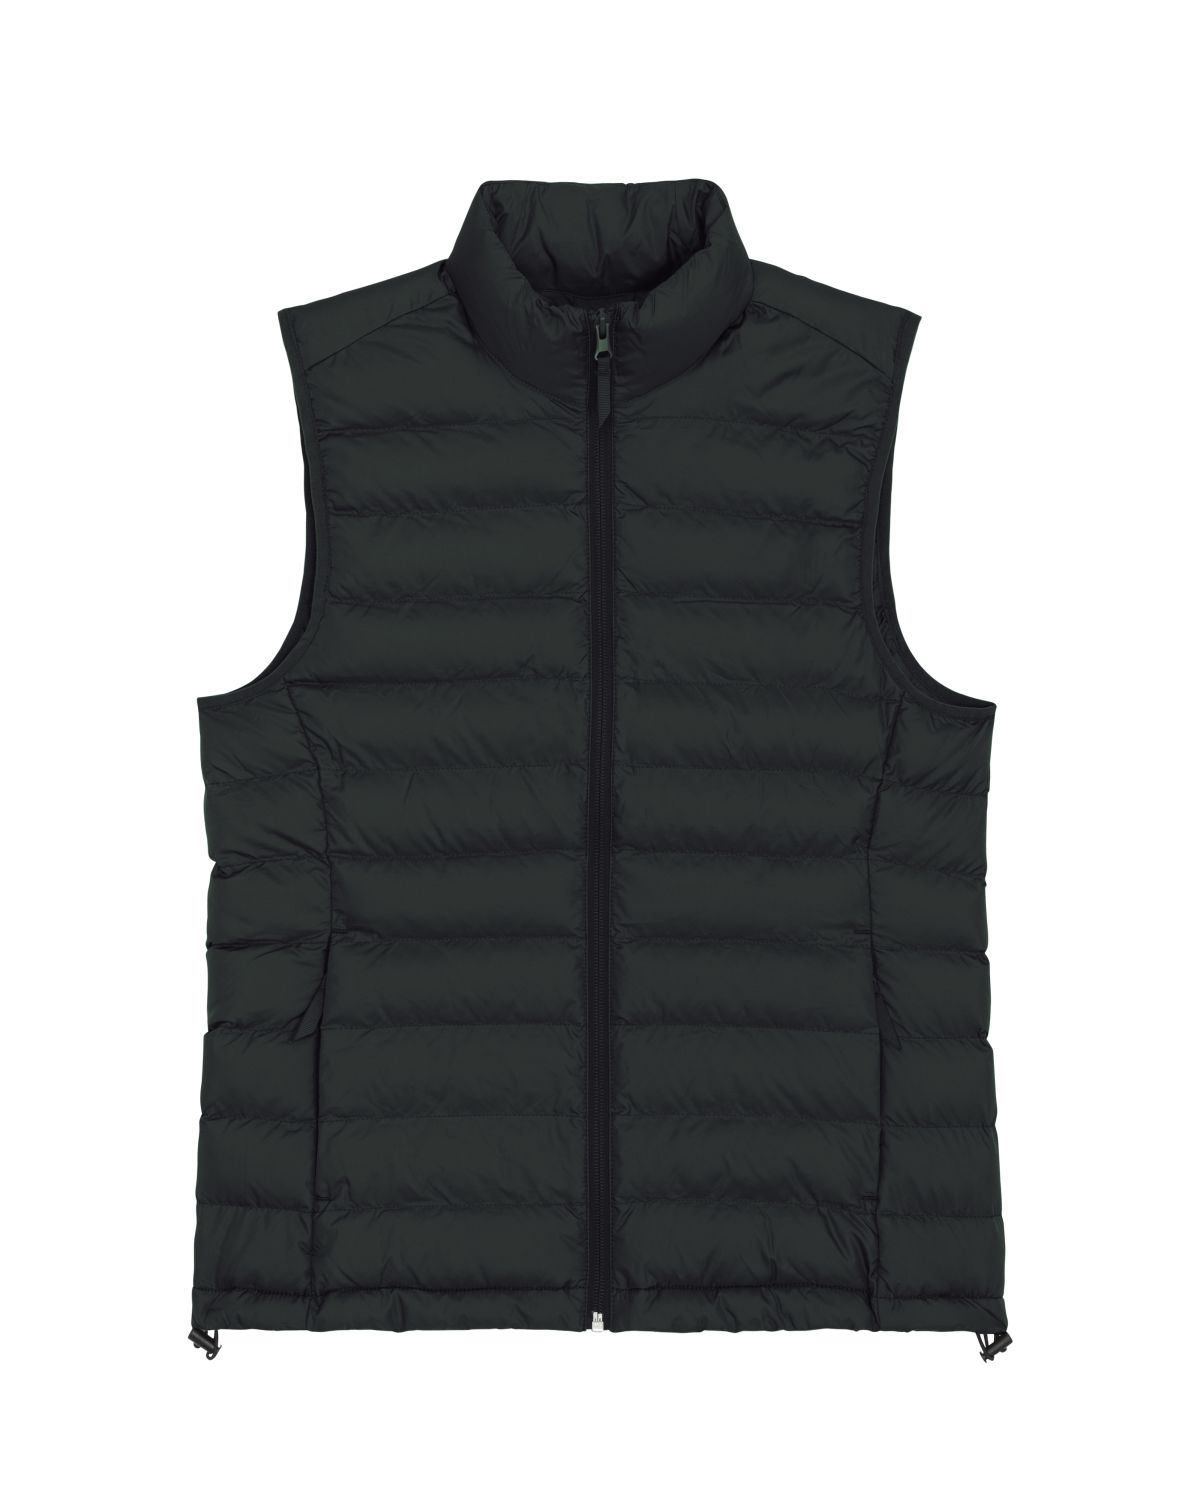 Customize your own Vest